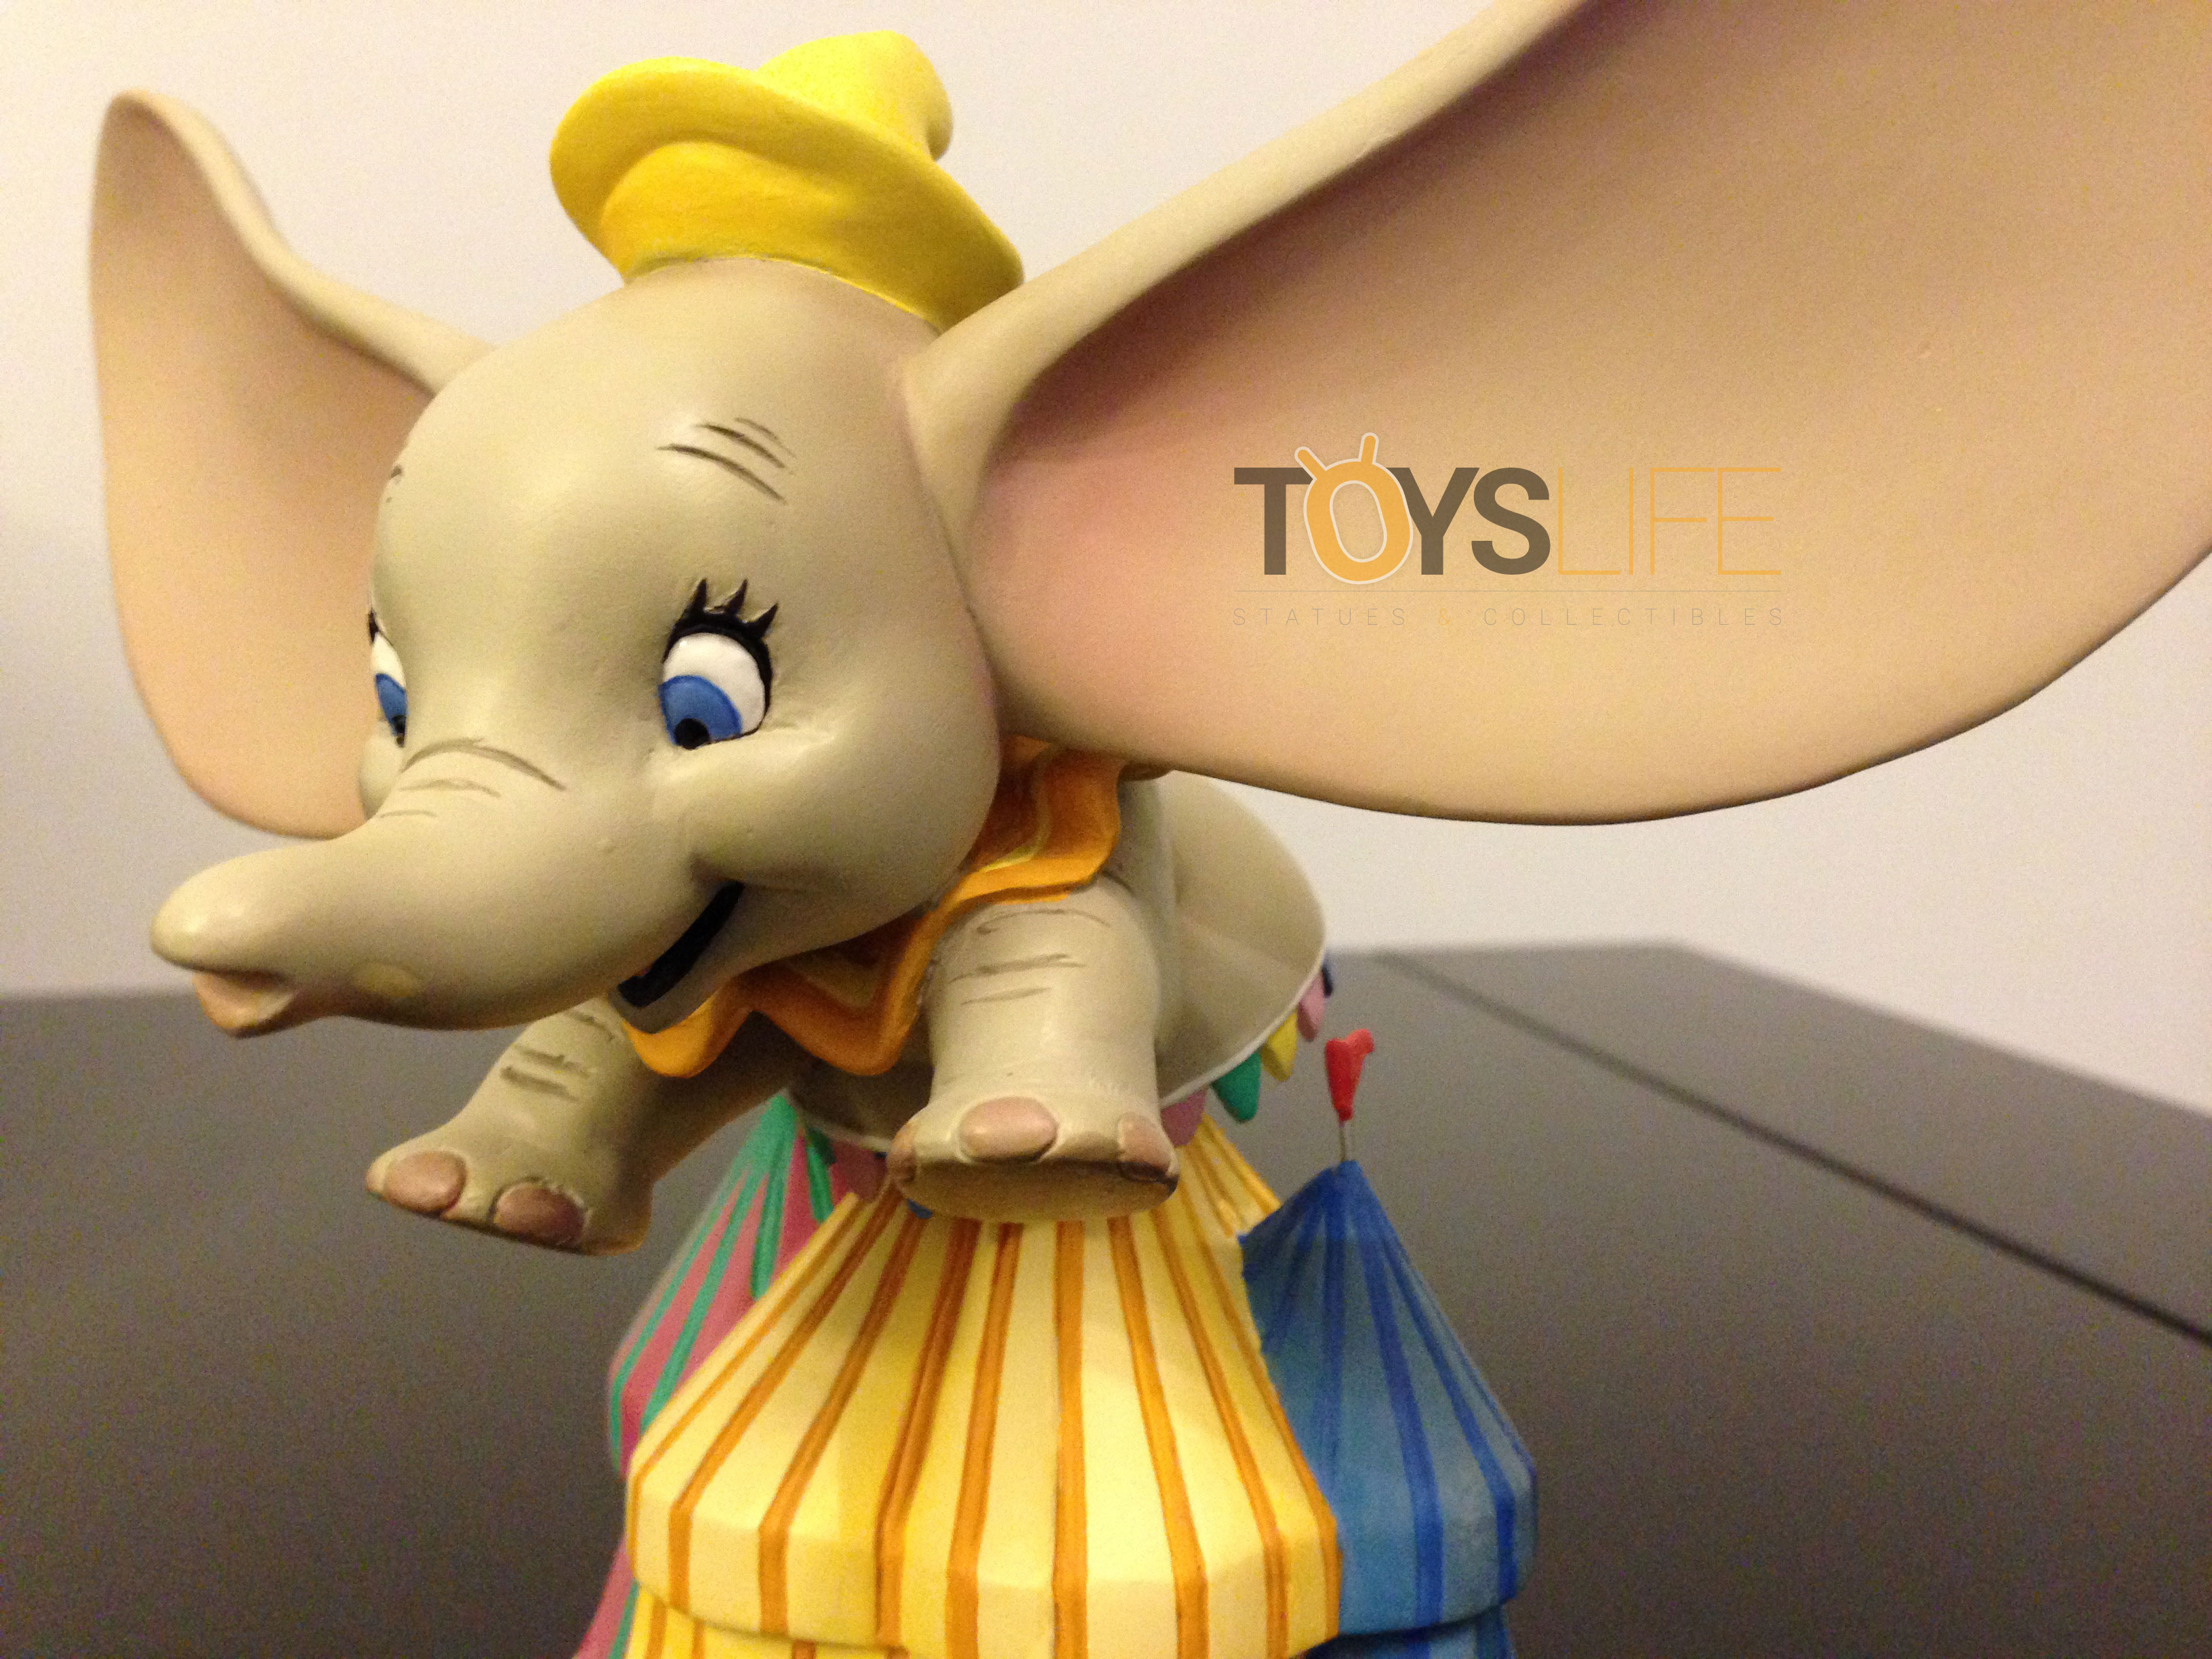 grand-jester-studios-dumbo-bust-toyslife-review-02